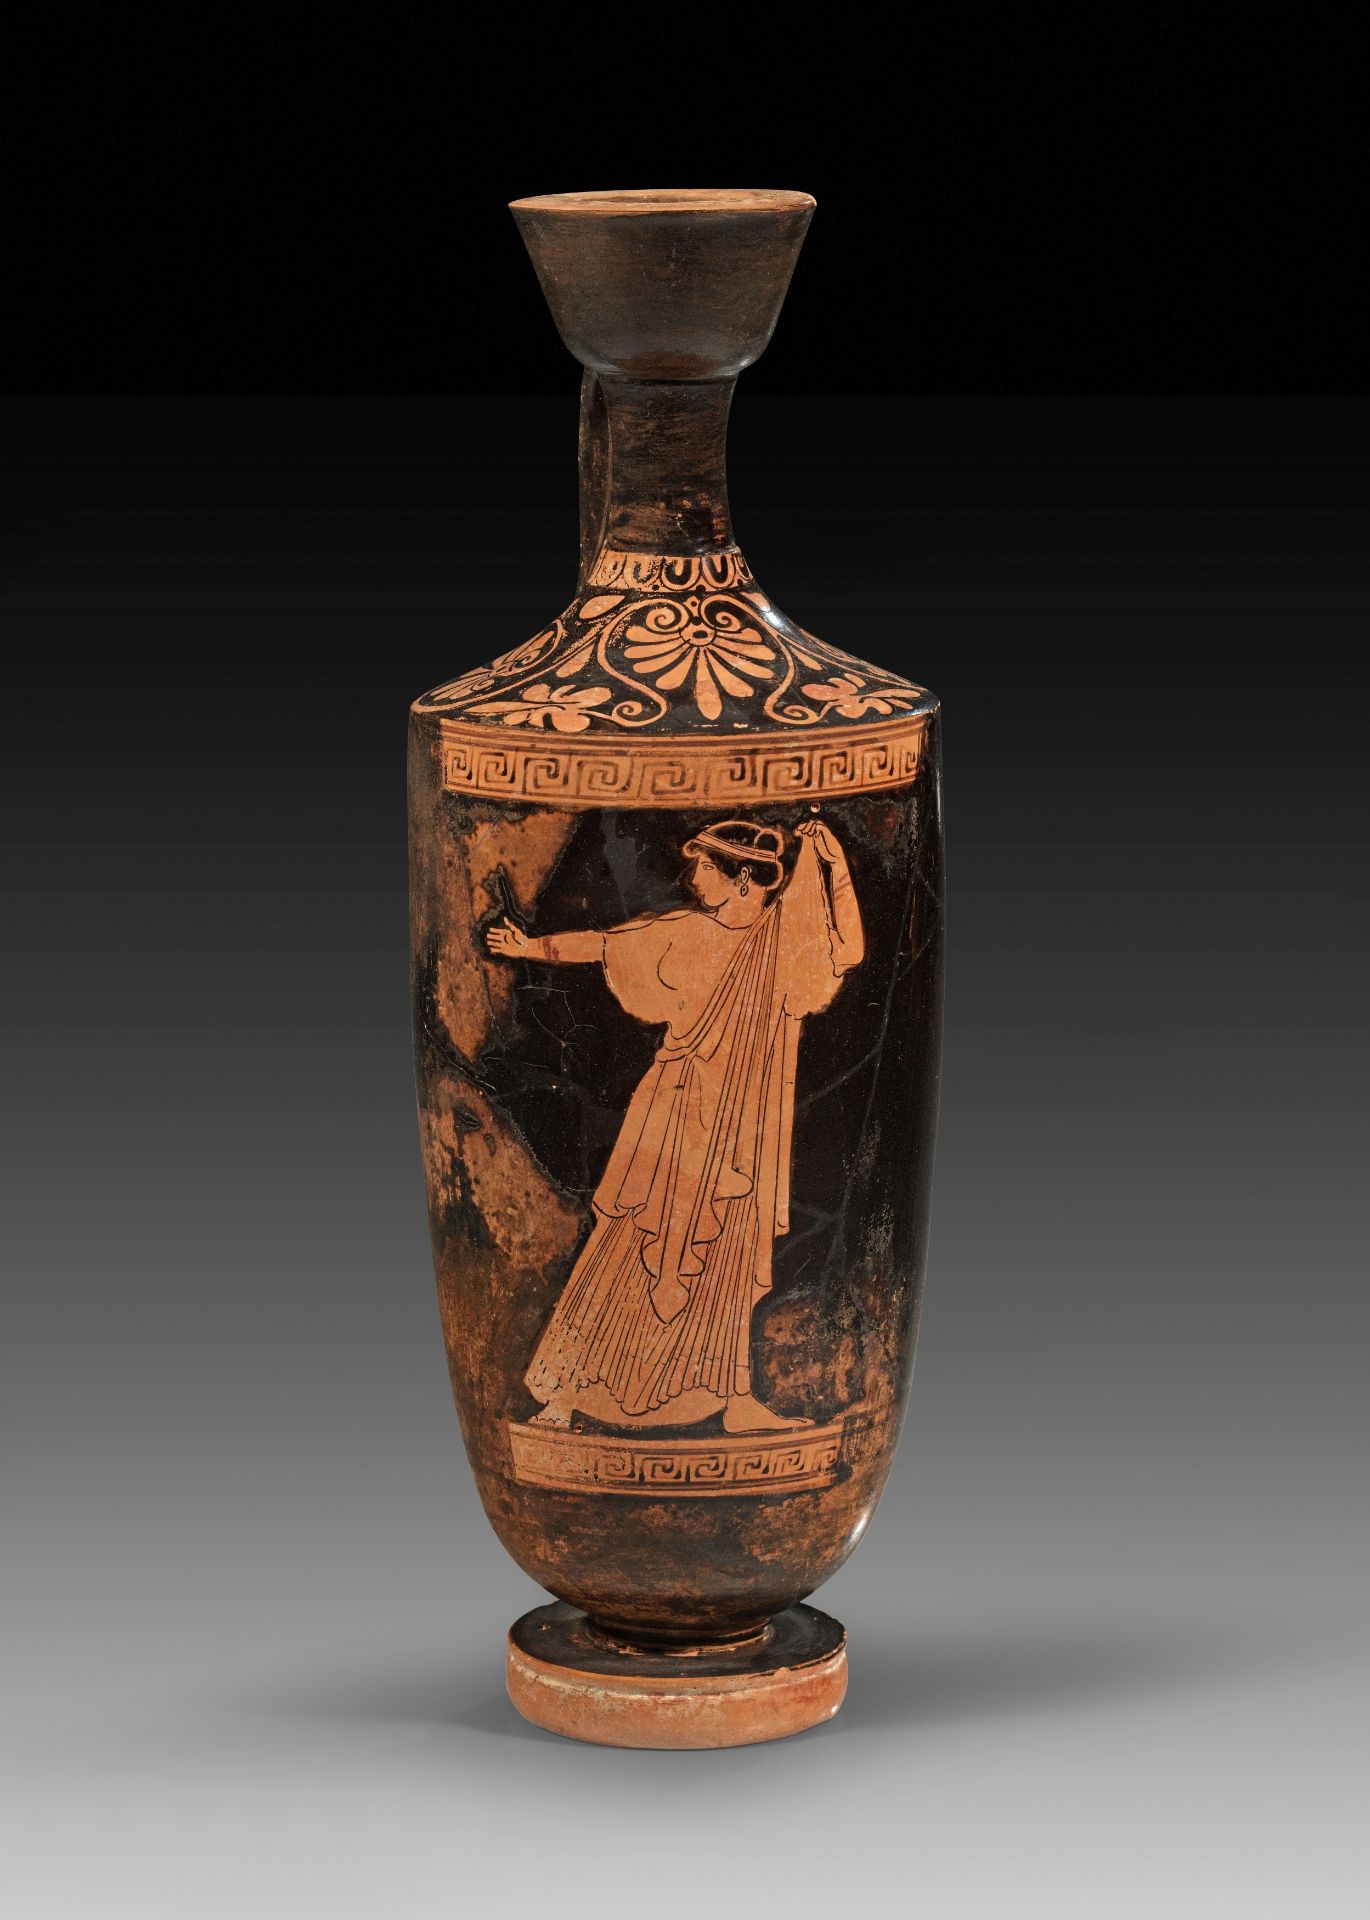 Large Attic red-figure cylindrical lekythos of the Providence Painter. - Image 2 of 2